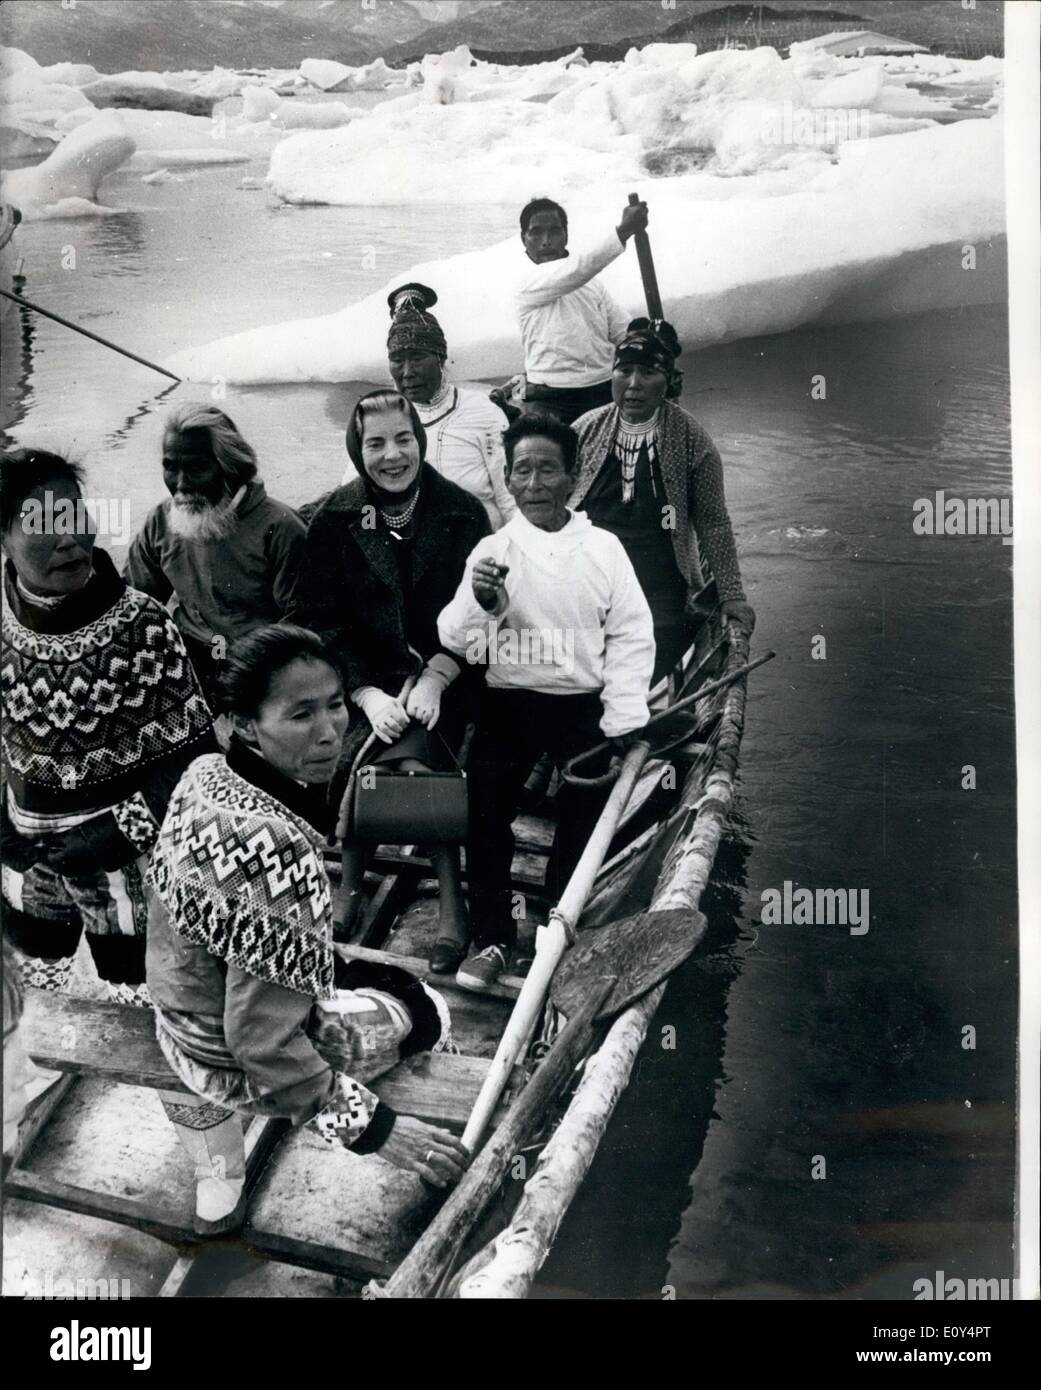 Aug. 08, 1968 - Queen Ingrid Sails in a ''Umiak'': During the Royal Danish visit to Greenland, Queen Ingrid (in center) was invited to sail in an old Grenlander ''Umiak'' ( A boat specially made for women in olden times) Stock Photo